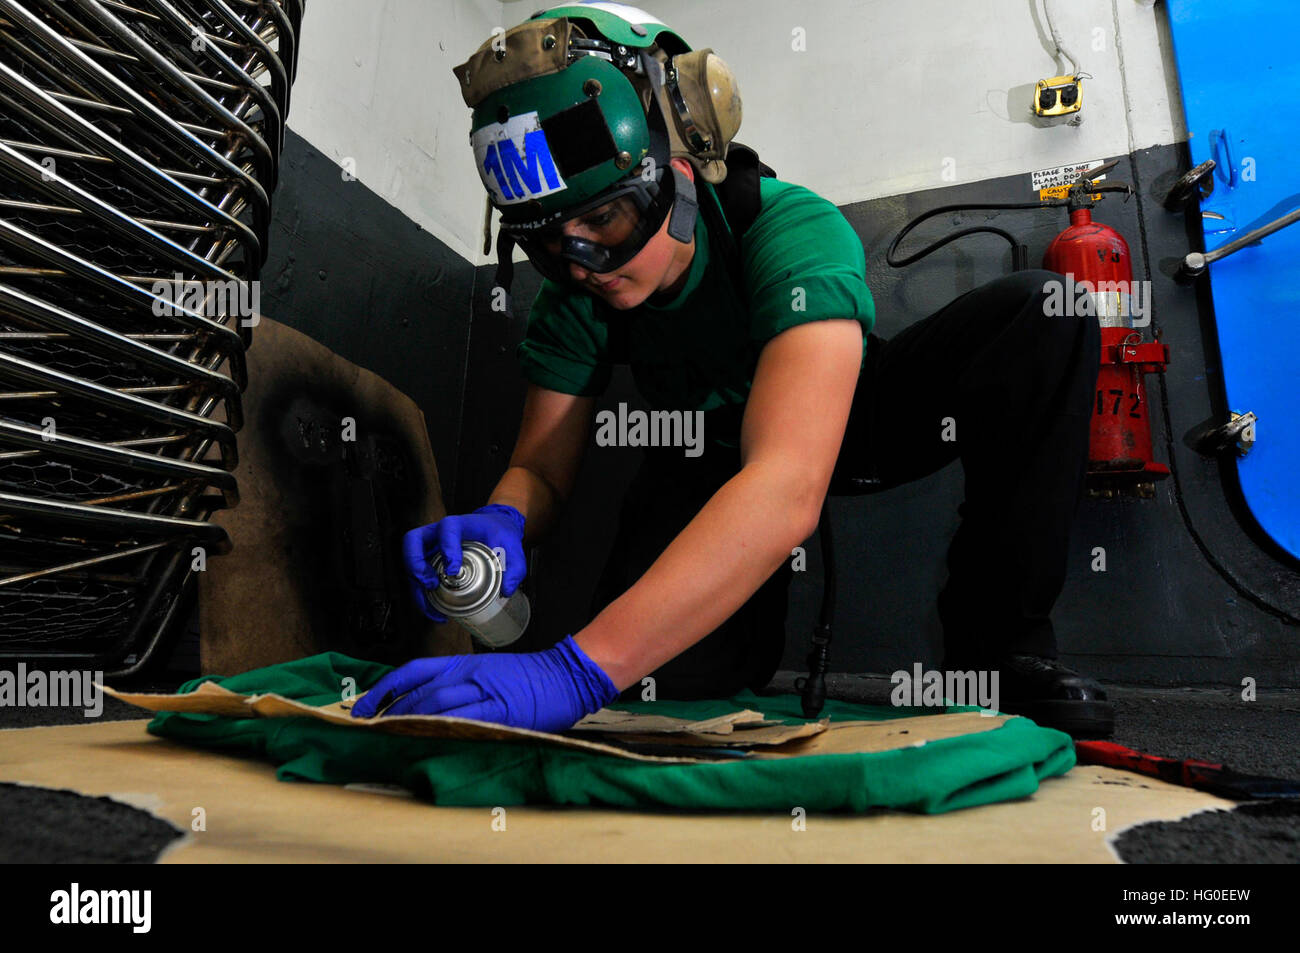 120209-N-ZI635-026  ARABIAN SEA (Feb. 9, 2012) Aviation Structural Mechanic Airman Caitlin Vancourt, assigned to Strike Fighter Squadron (VFA) 22, stencils flight deck jerseys in the hangar bay aboard the Nimitz-class aircraft carrier USS Carl Vinson (CVN 70). Carl Vinson and Carrier Air Wing (CVW) 17 are deployed to the U.S. 5th Fleet area of responsibility. (U.S. Navy photo by Mass Communication Specialist Seaman George M. Bell/Released) US Navy 120209-N-ZI635-026 Aviation Structural Mechanic Airman Caitlin Vancourt, assigned to Strike Fighter Squadron (VFA) 22, stencils flight deck Stock Photo